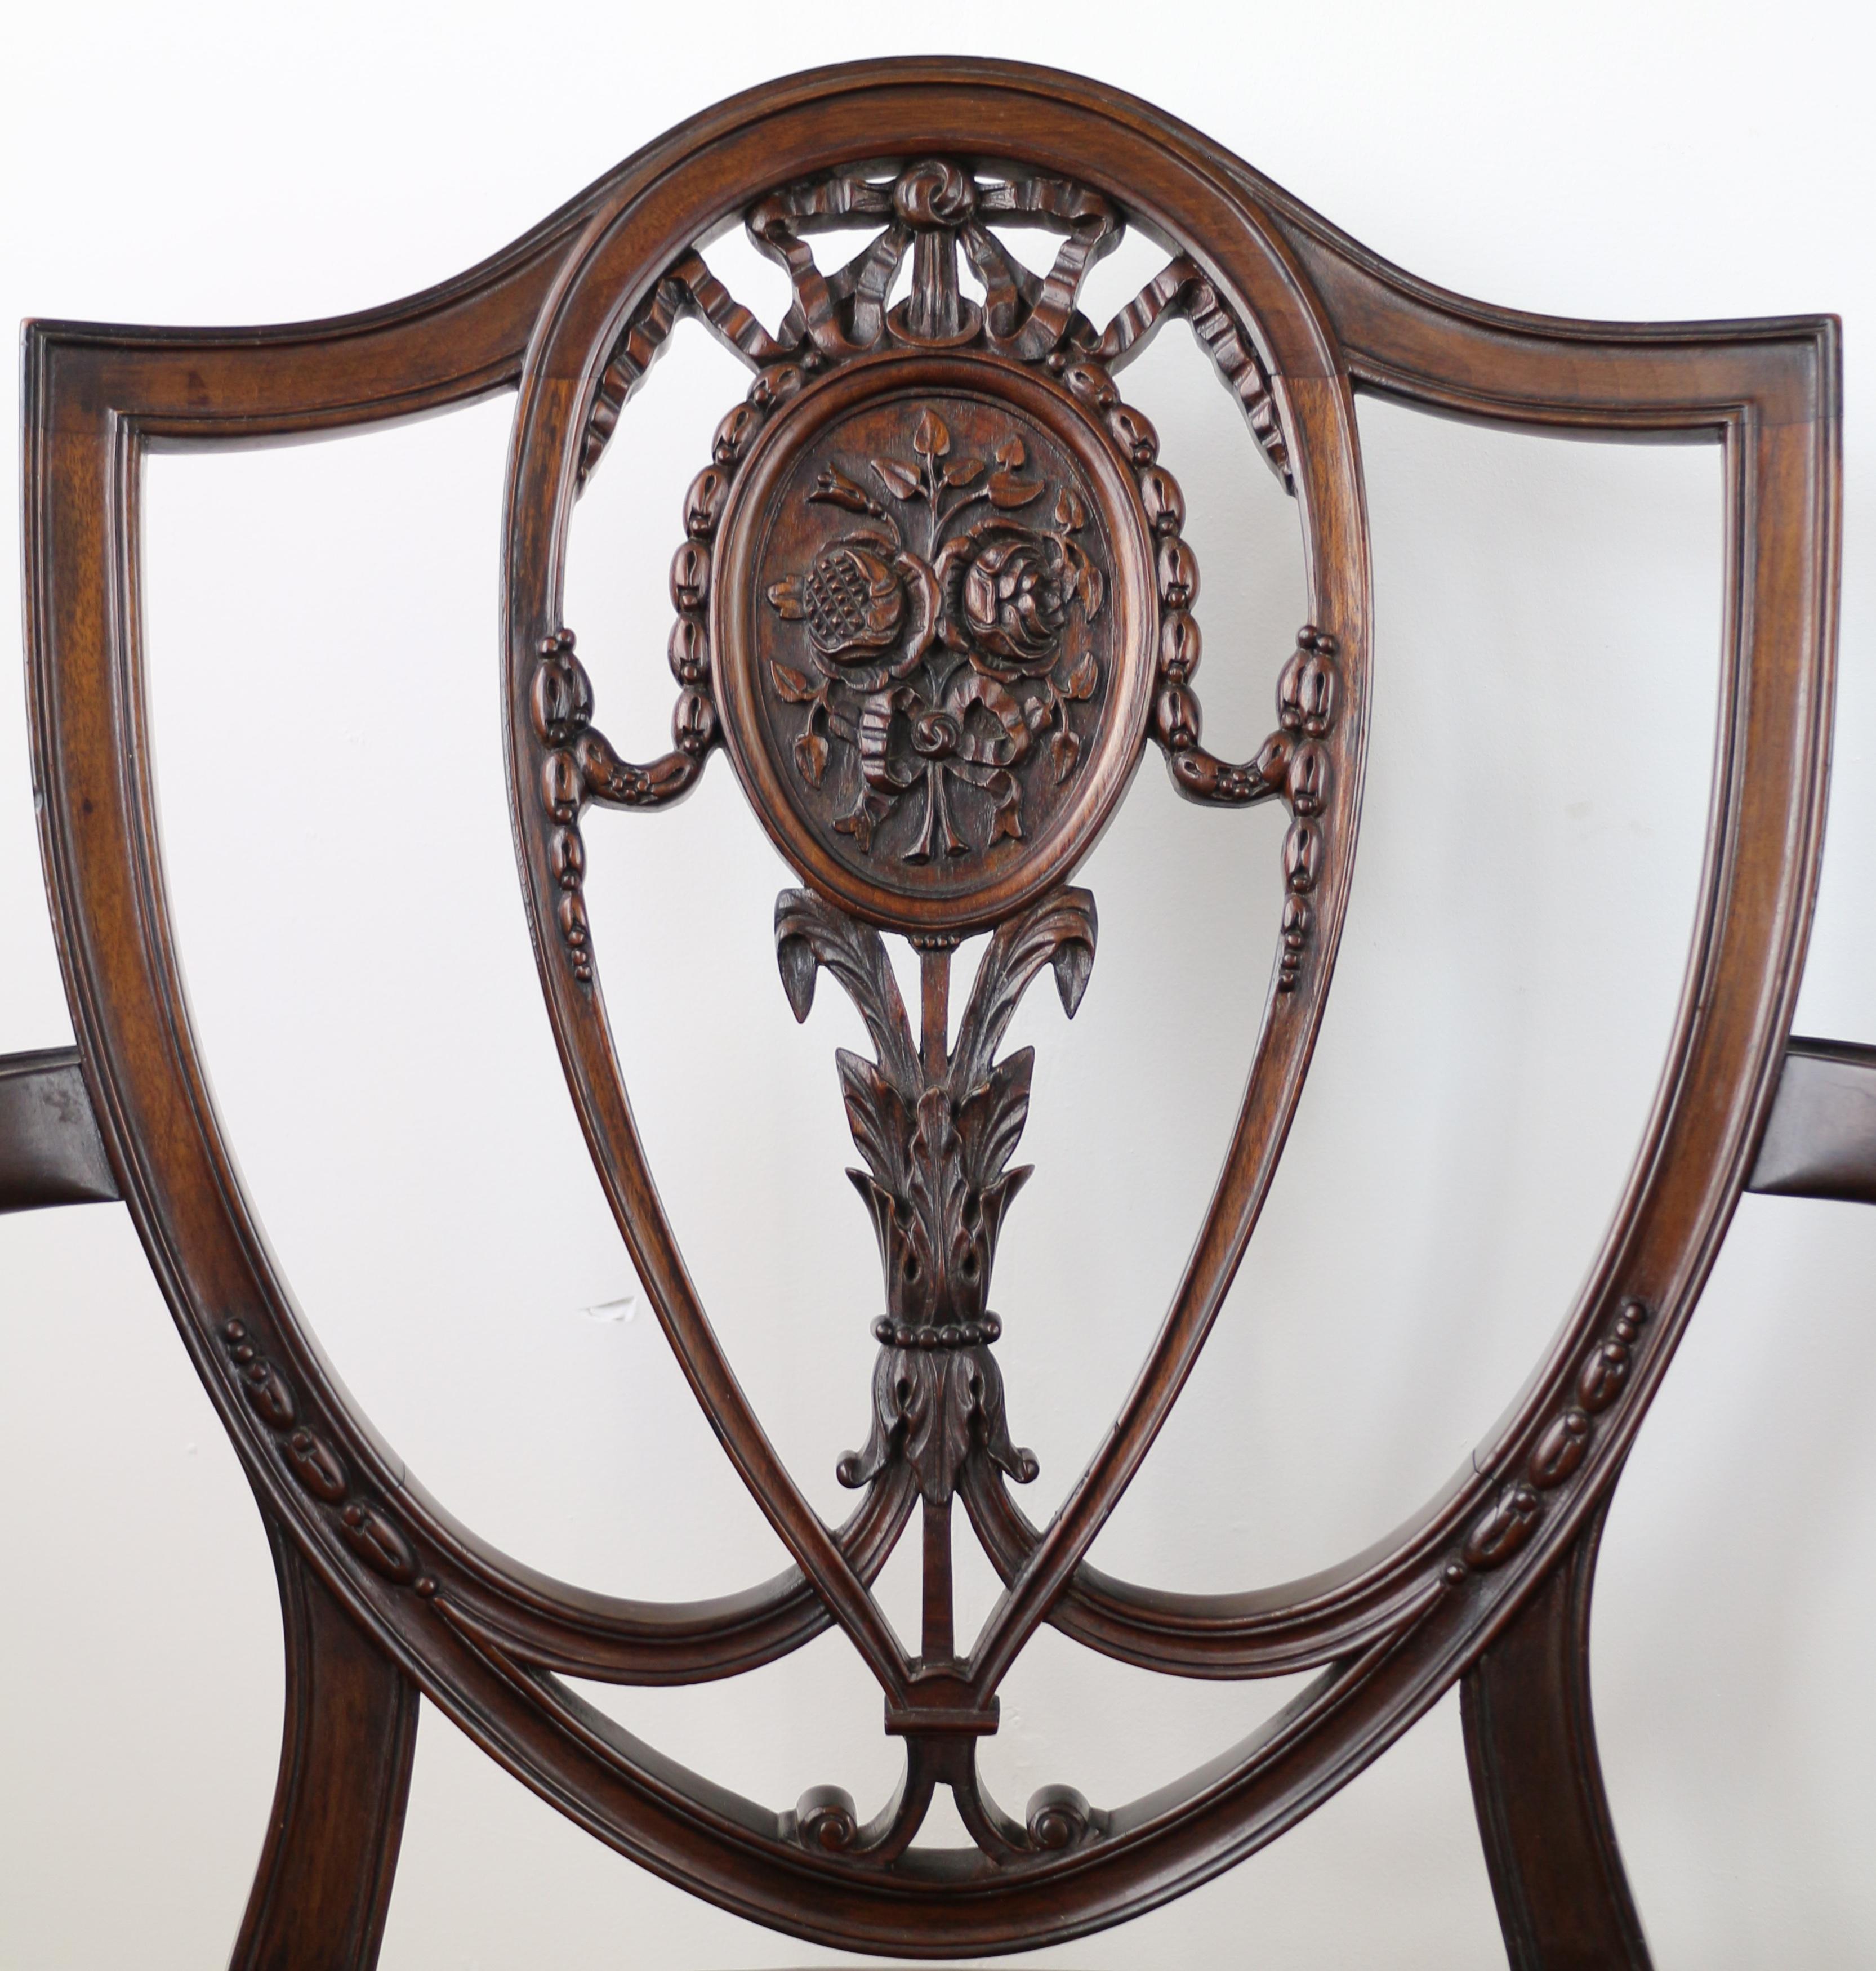 A beautiful set of ten Victorian mahogany cabriole carver arm chairs from a 1788 Georgian Hepplewhite design and probably made by Gillows. Featuring broad serpentine shaped sprung seats each chair has a pierced shield shaped back carved with ribbon